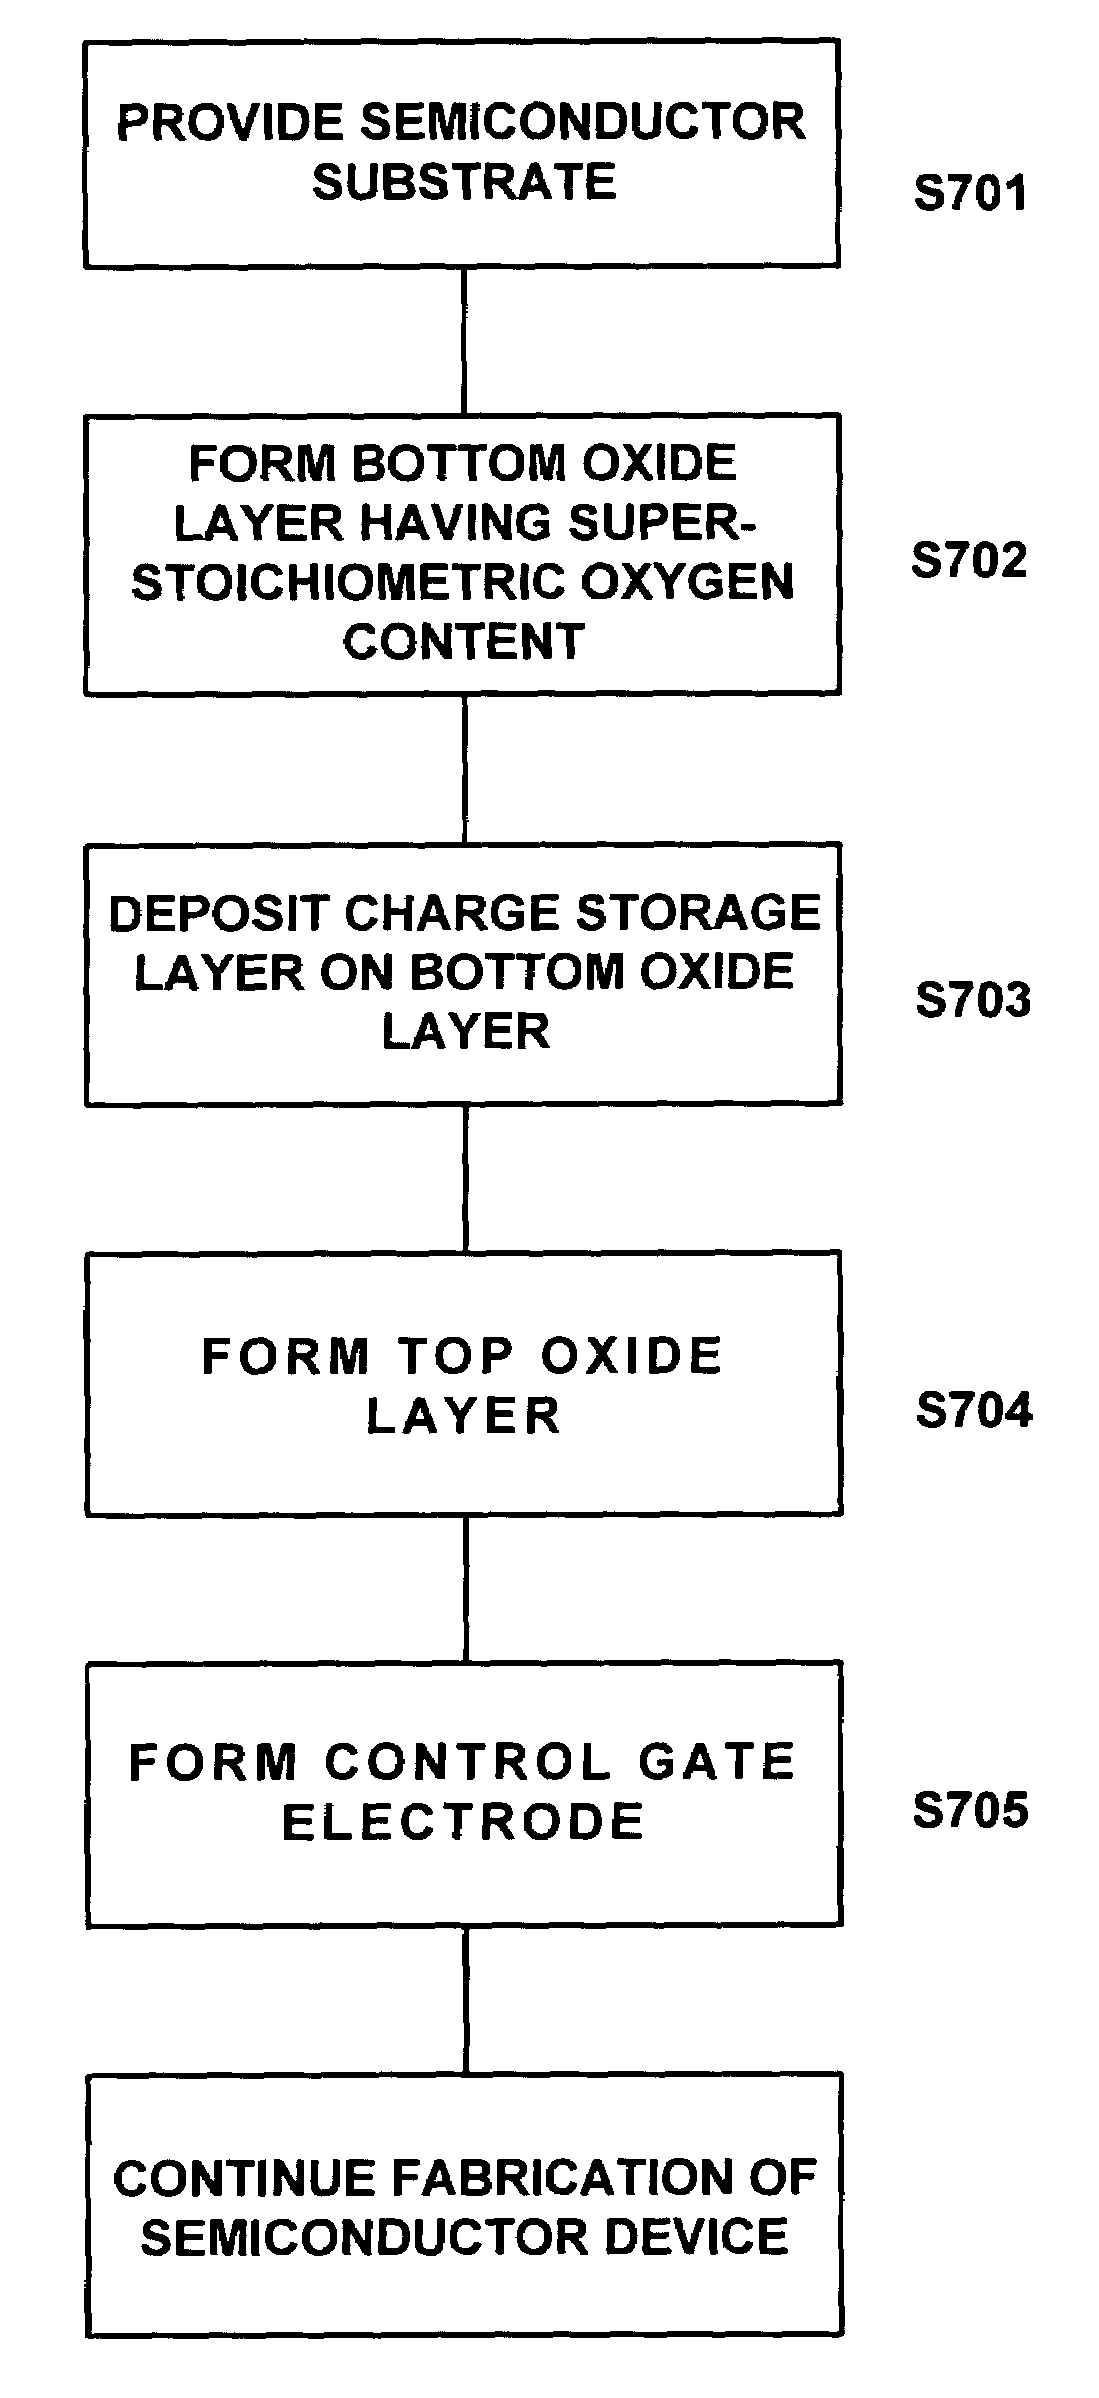 ONO fabrication process for increasing oxygen content at bottom oxide-substrate interface in flash memory devices